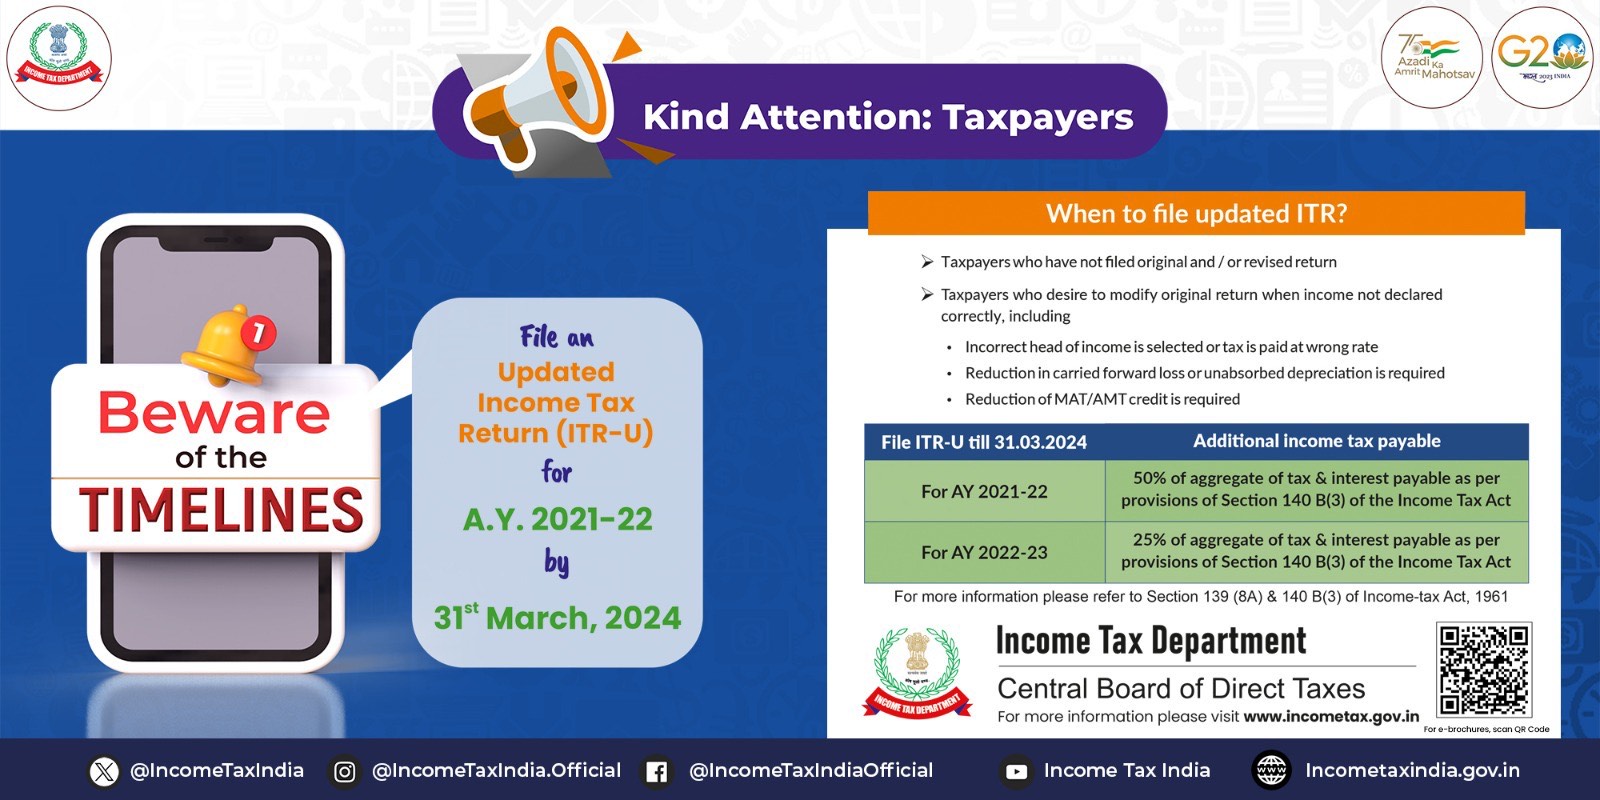 Urgent Reminder for Taxpayers: File Your Updated Income Tax Return by March 31, 2024